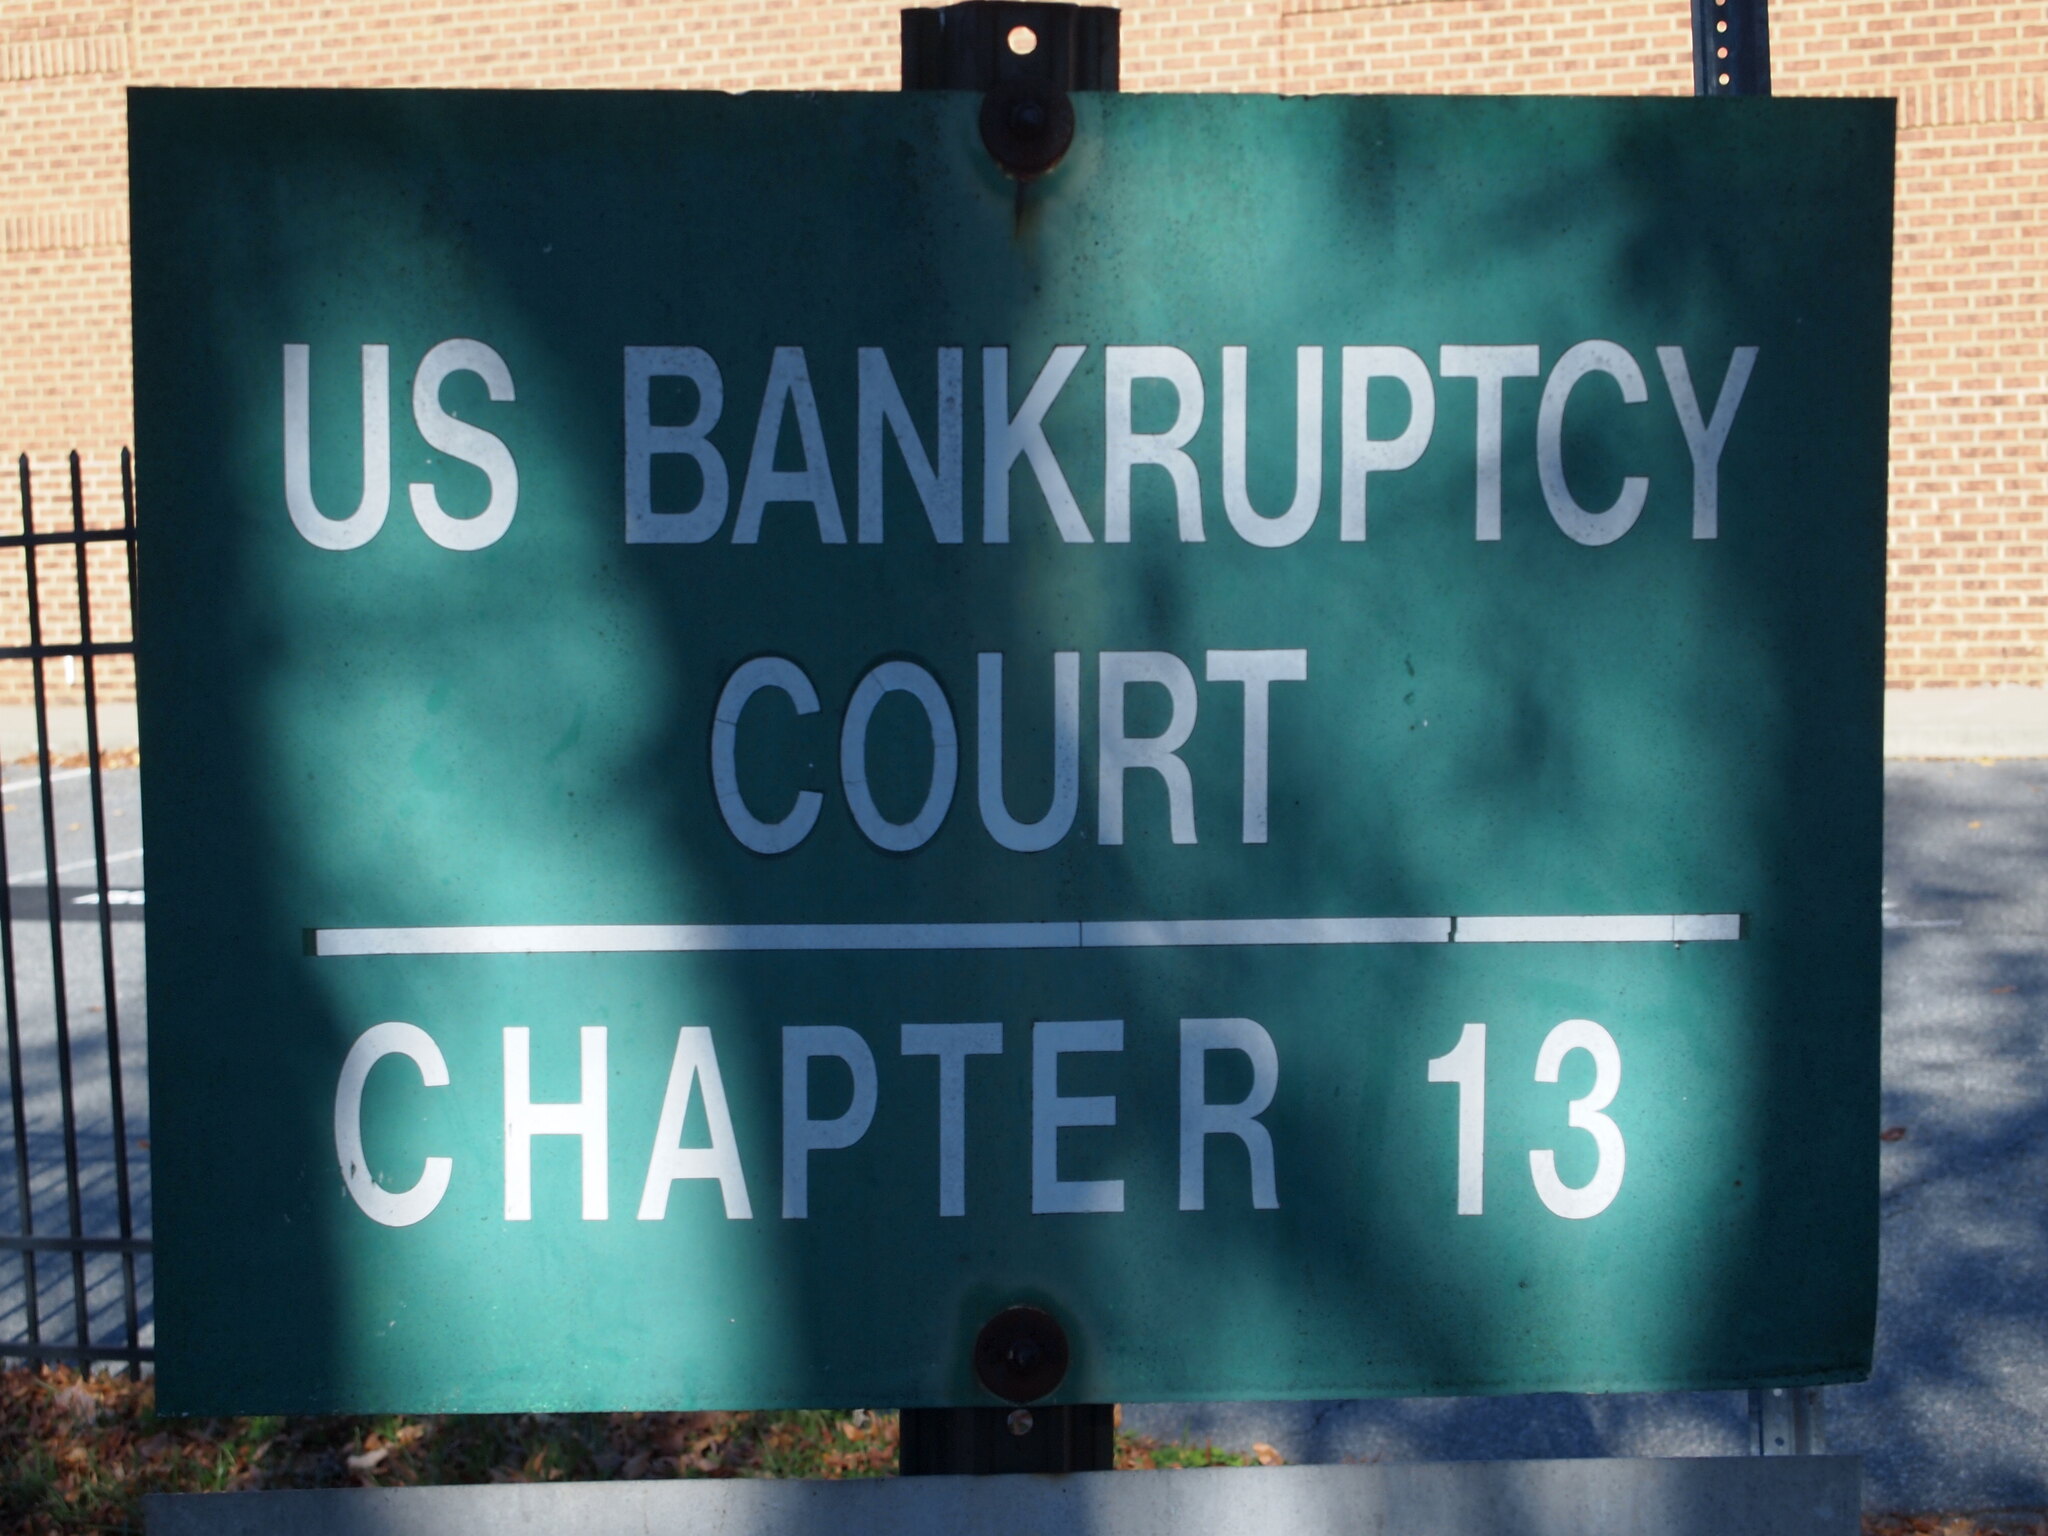 Green and white sign saying US Bankruptcy Court Chapter 13; image by Fried Dough, via Flickr.com, CC BY 2.0.